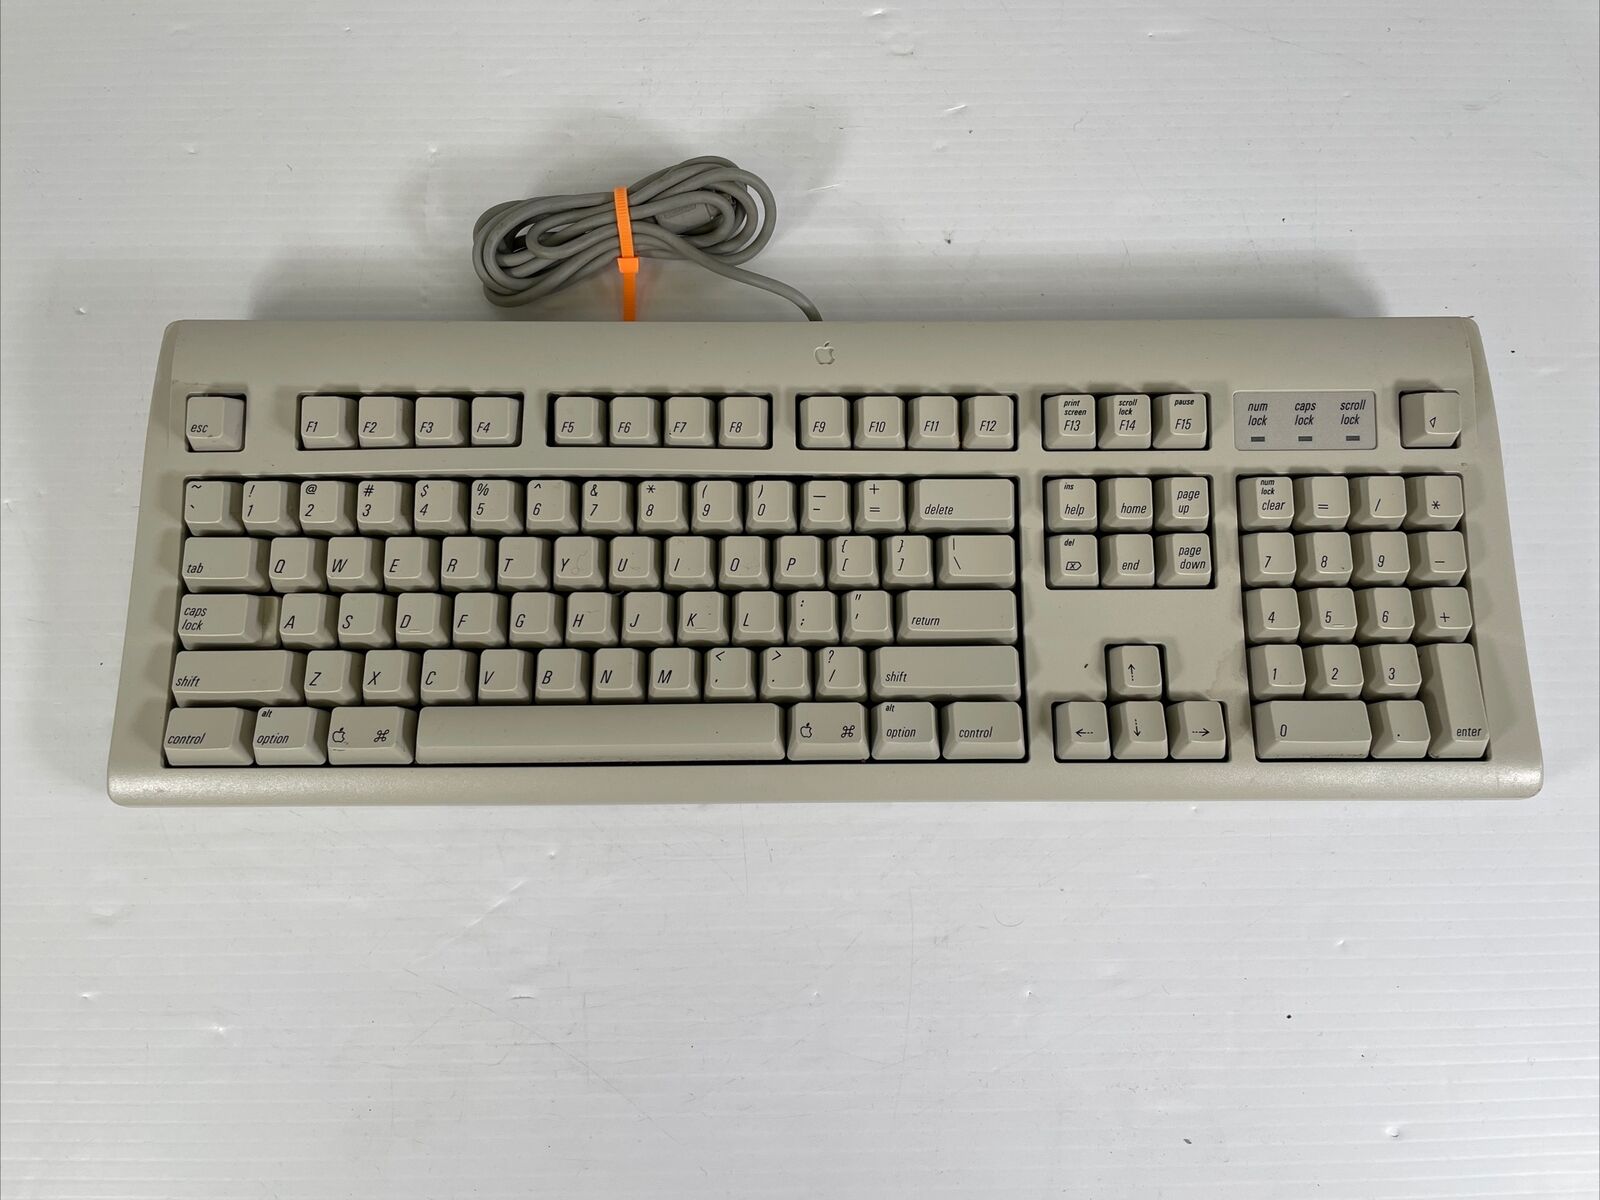 Vintage Apple M2980 AppleDesign Keyboard - Tested and working - Good condition